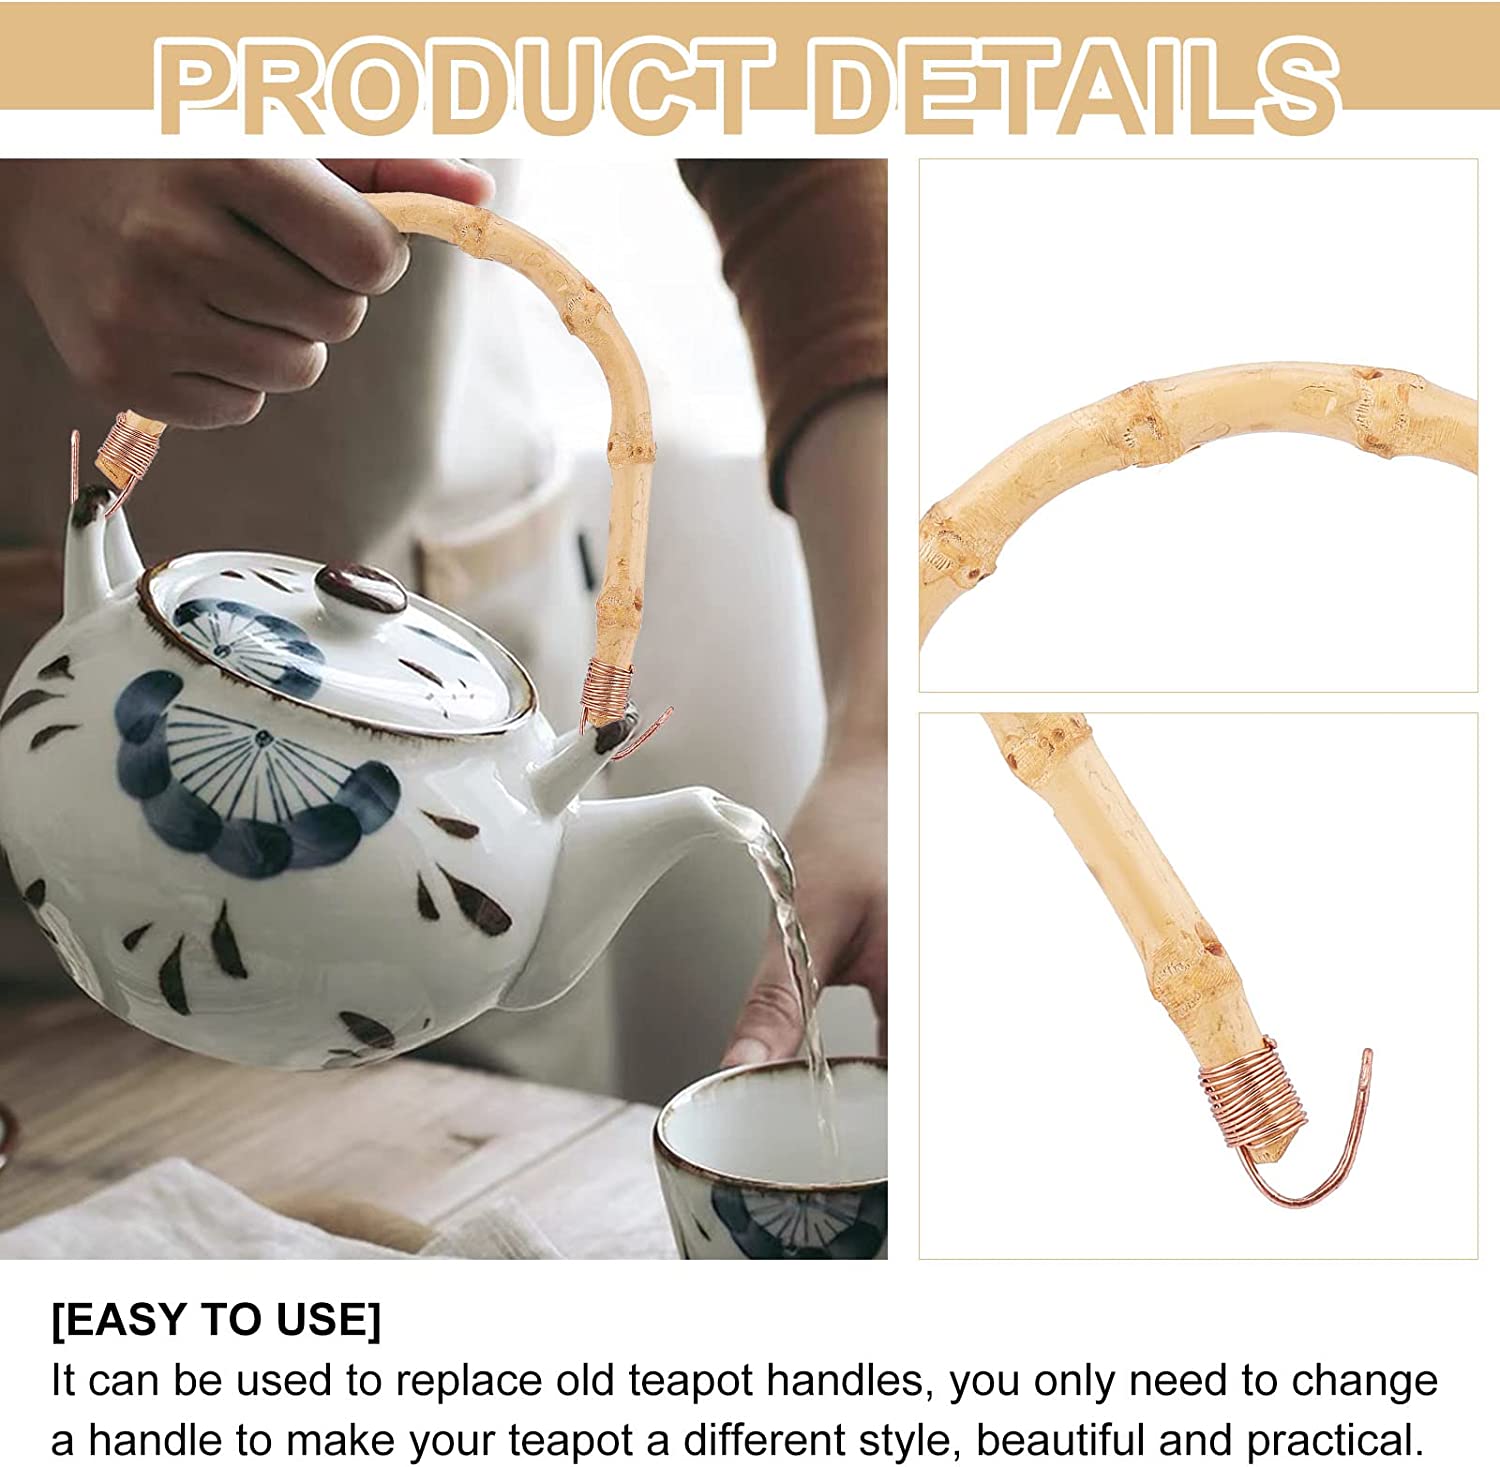 4pcs Bamboo Teapot Handle U-Shape Handle Replacement Kung Fu Teapot Accessories Supplies for Ceramic and Pottery Tea Pots Handle Purses - image 4 of 7